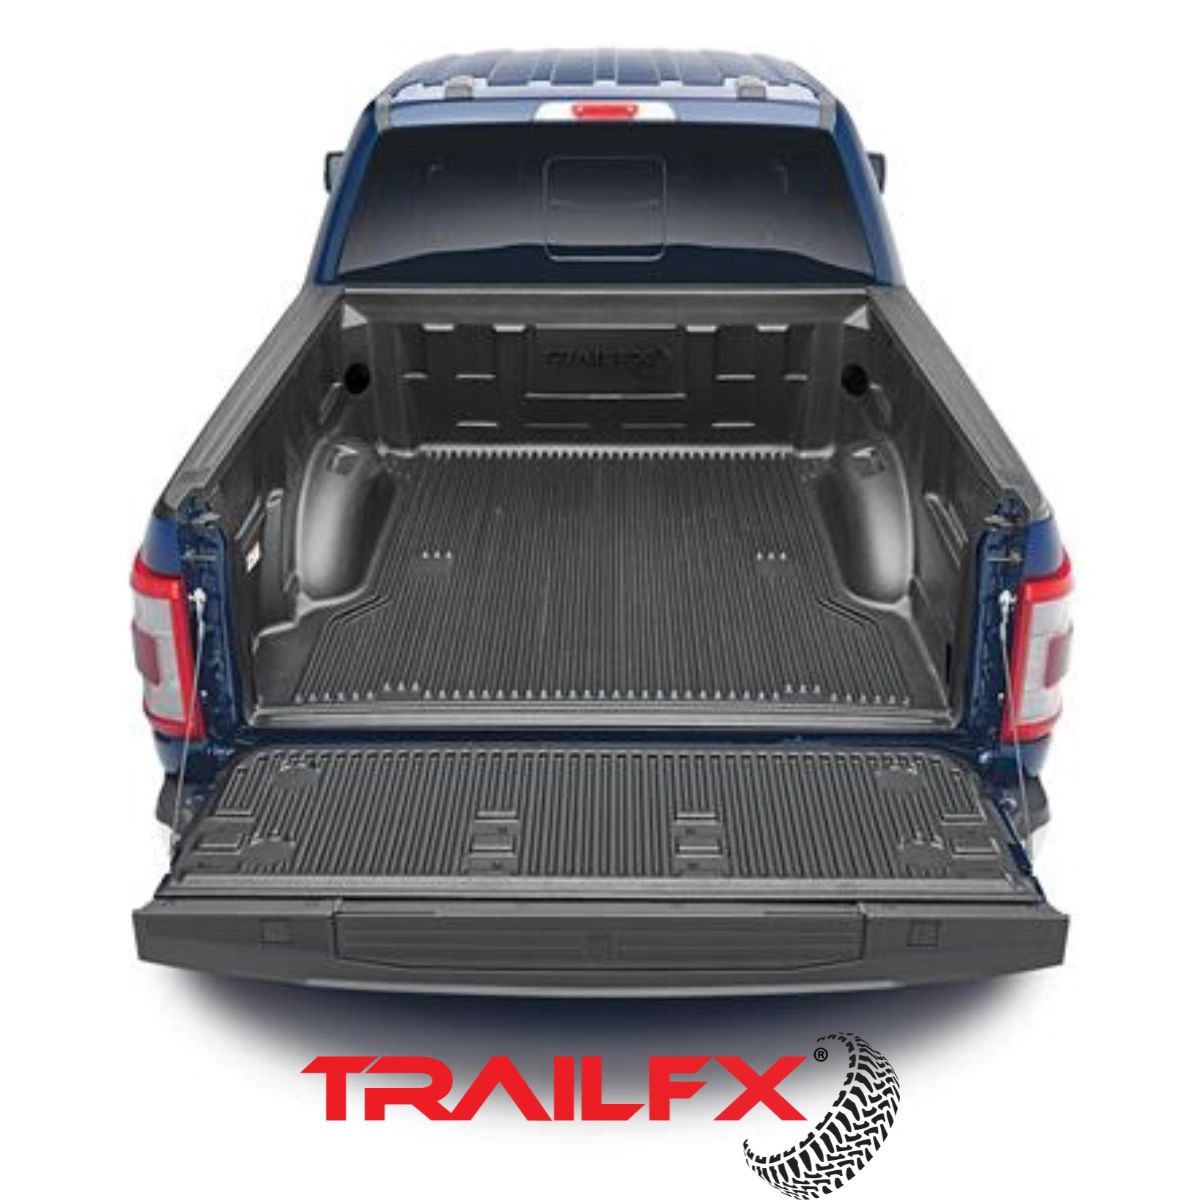 Defend your truck bed with TrailFX’s Bed Liner.